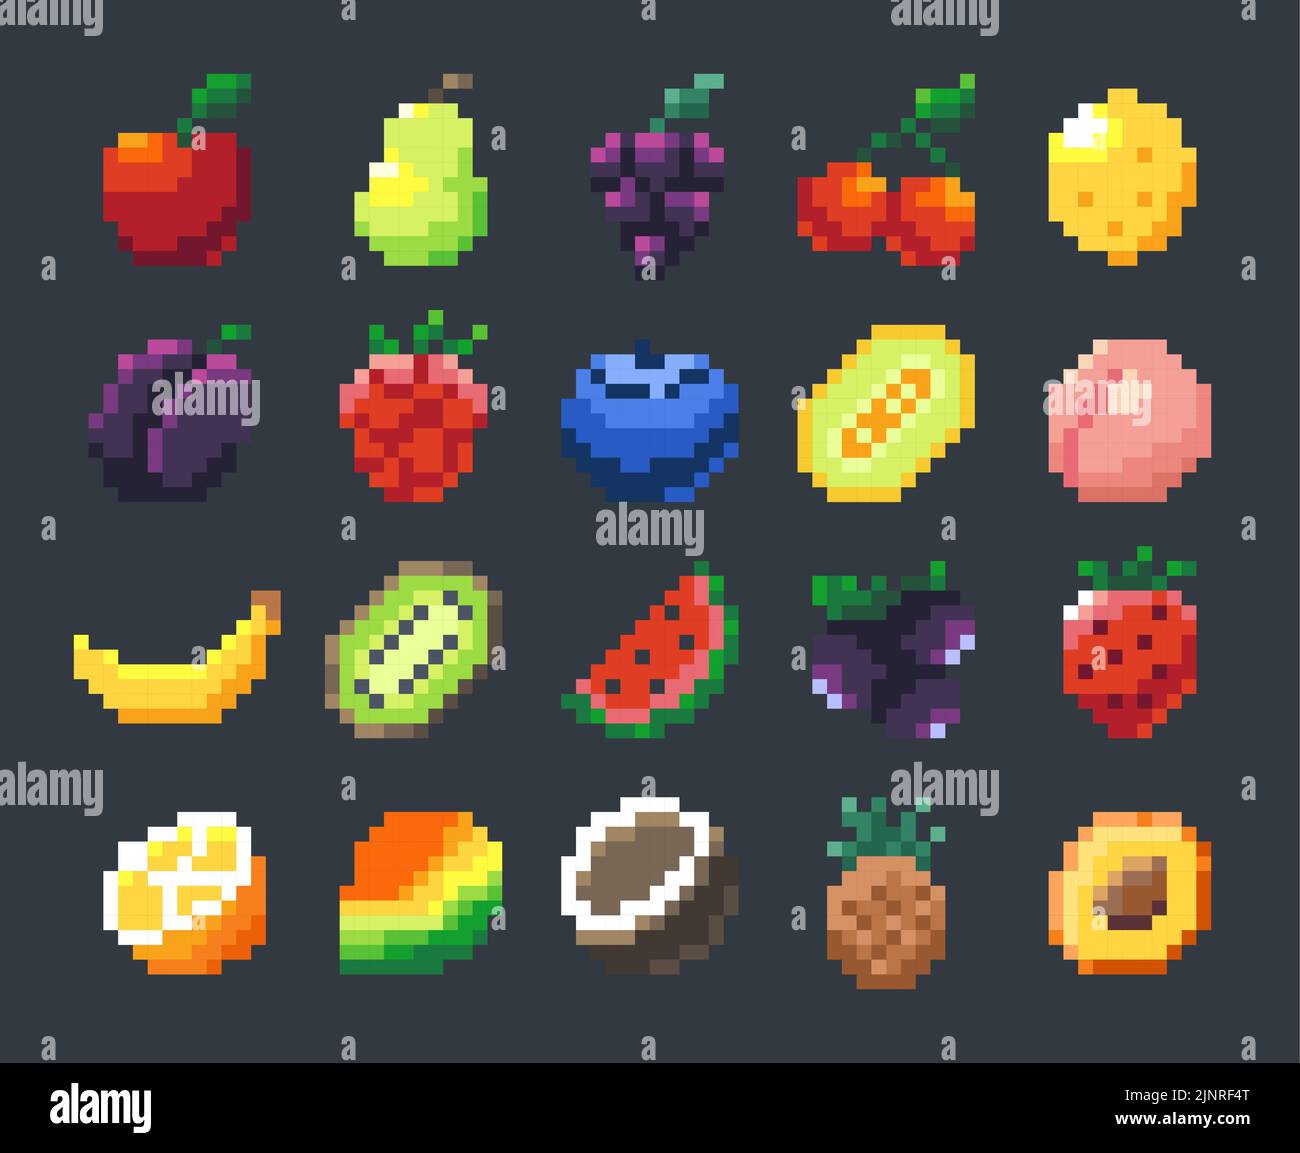 Pixel fruits. Cartoon 2D game sprite asset with apple banana mango citrus pineapple cherry, 8-bit collection of fruit signs for game development Stock Vector